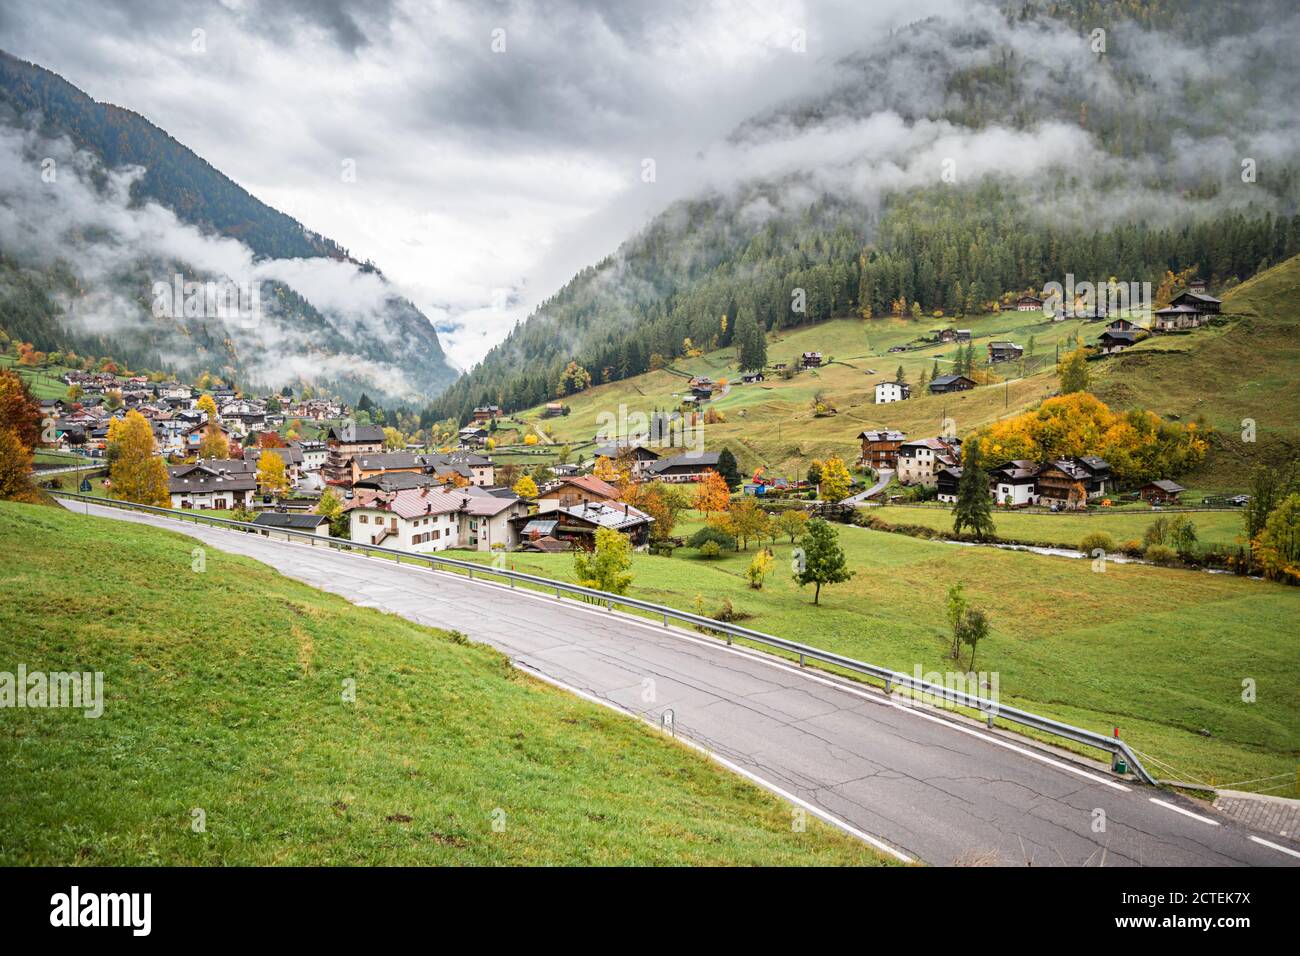 Landscape of road along some small village in northern Italy on the slopes of the Dolomites early autumn. Stock Photo